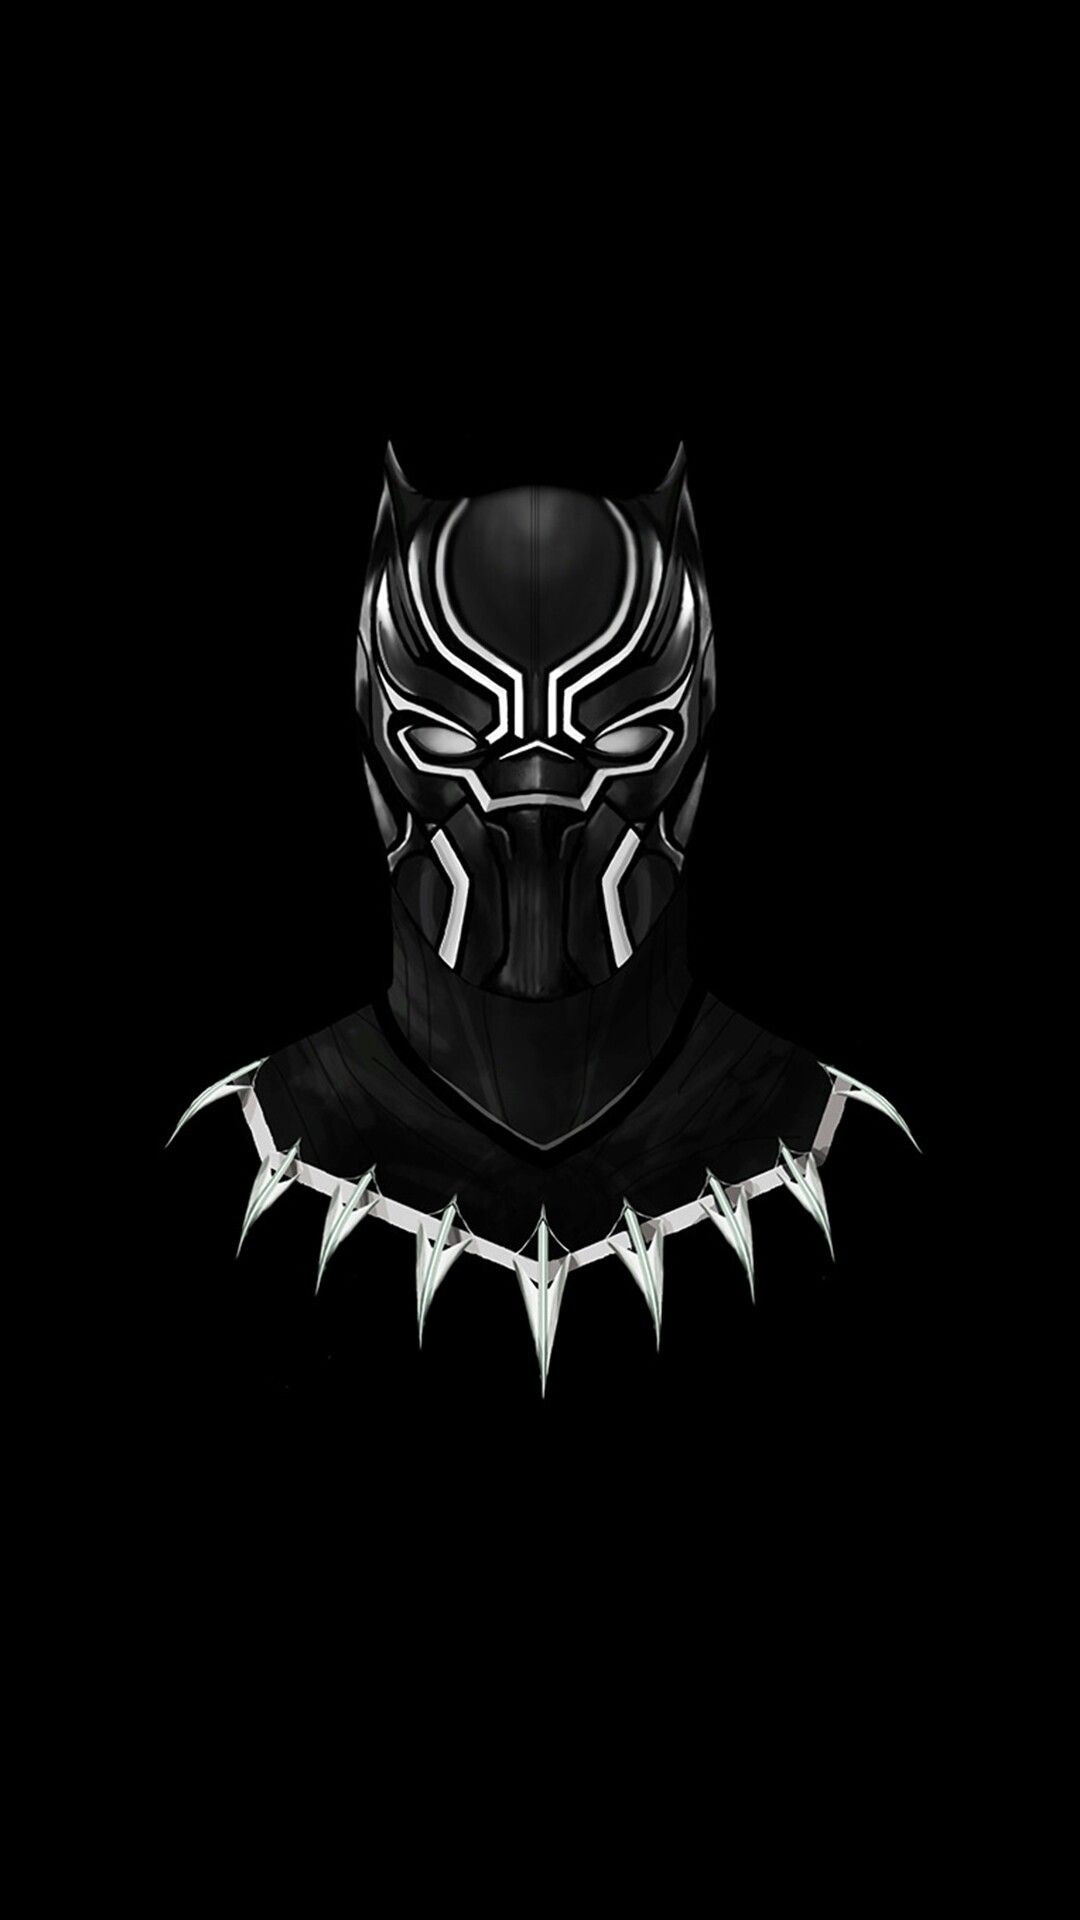 Black Panther Movie And Game Image Marvel